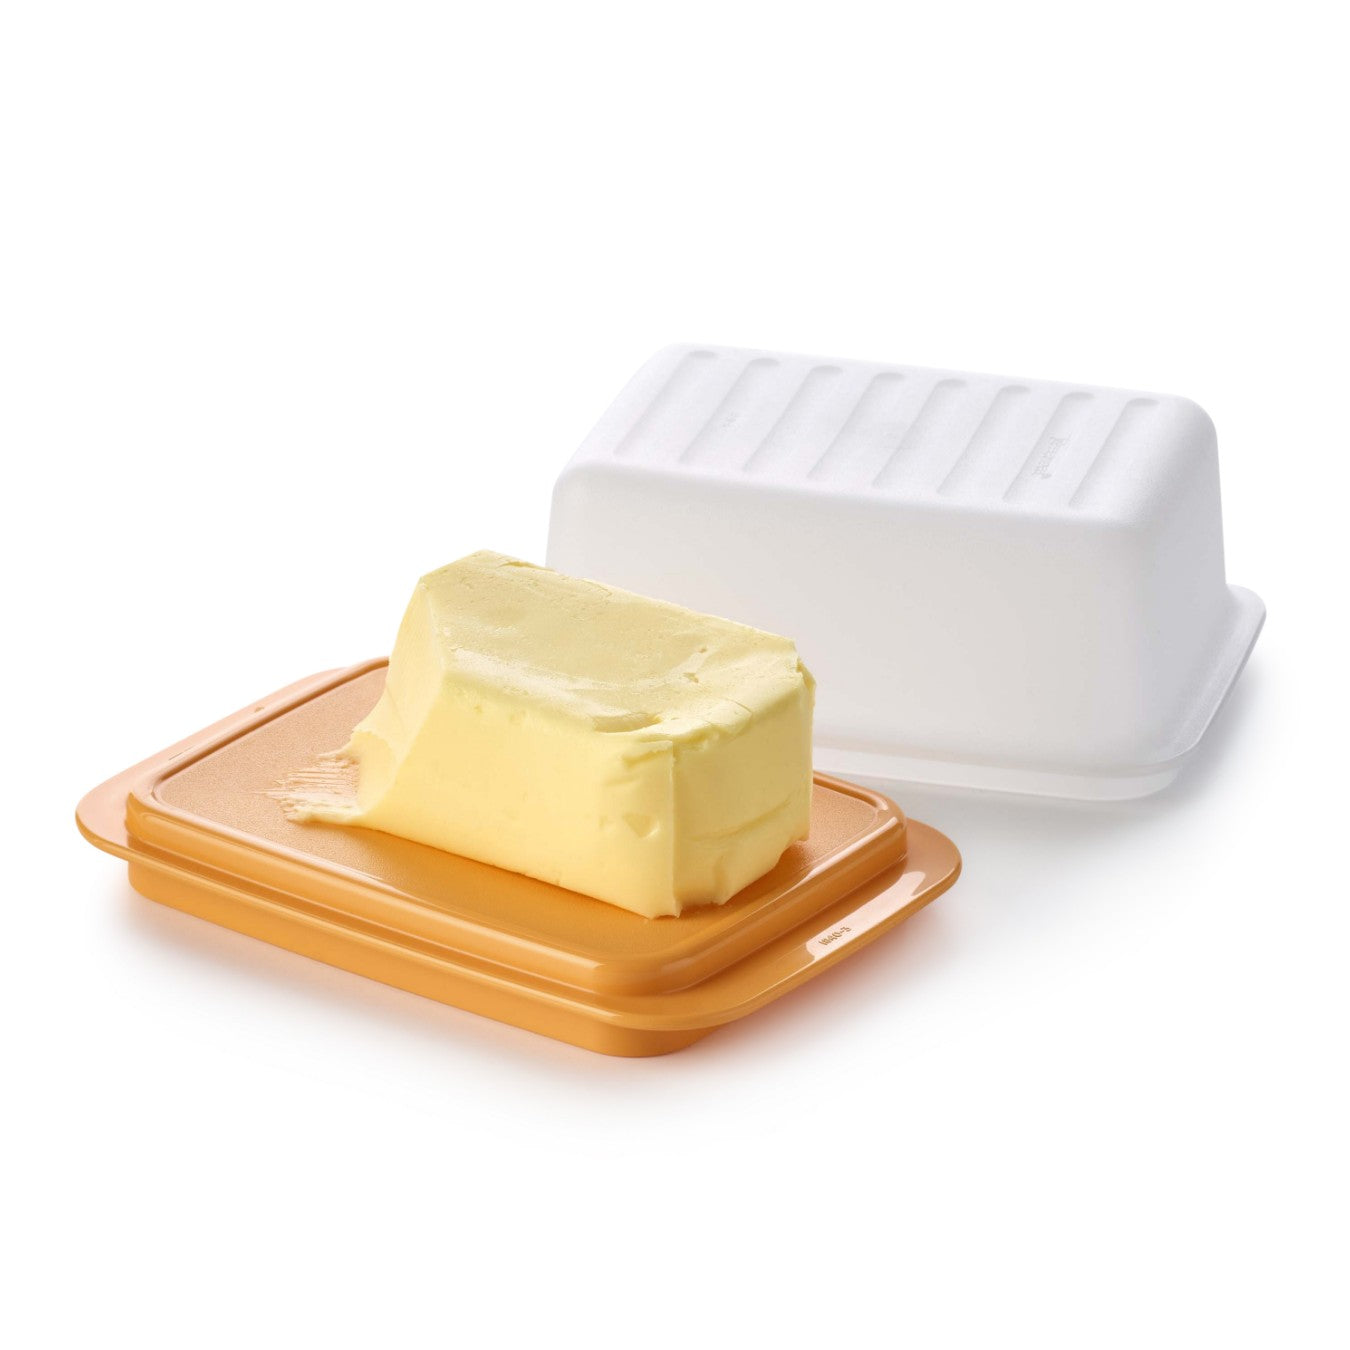 TW_Butter_Dish_Web_IMG_02